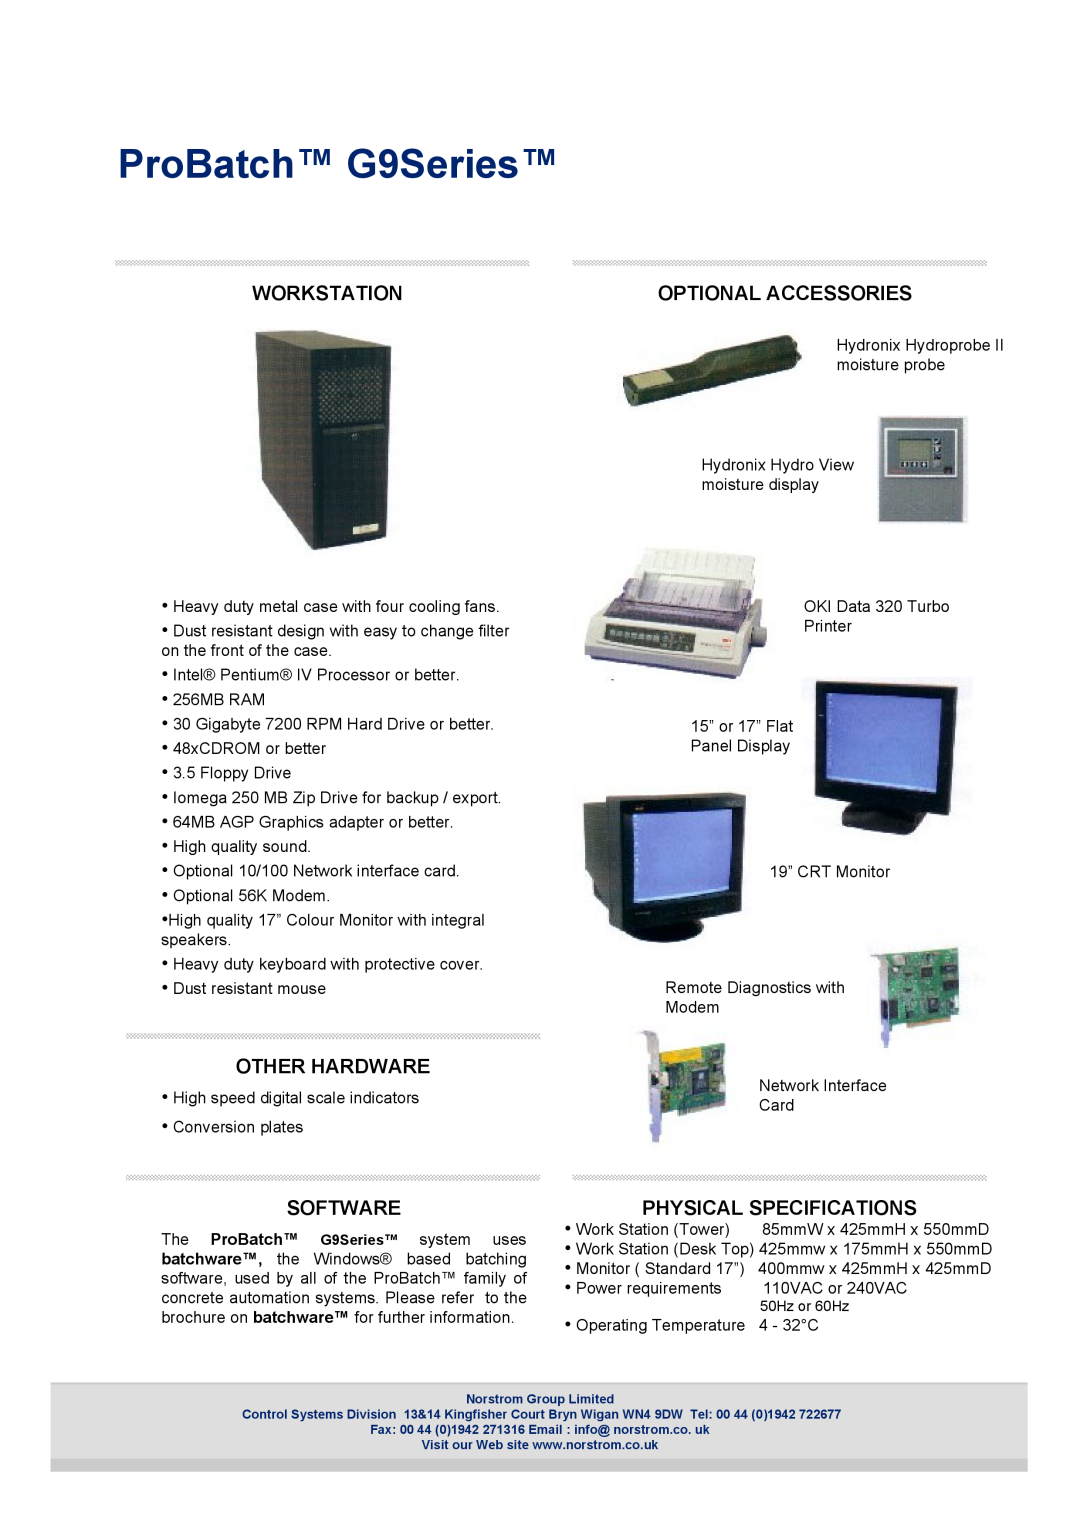 Oki brochure Workstation, Other Hardware, Software, Optional Accessories, Physical Specifications, ProBatch G9Series 